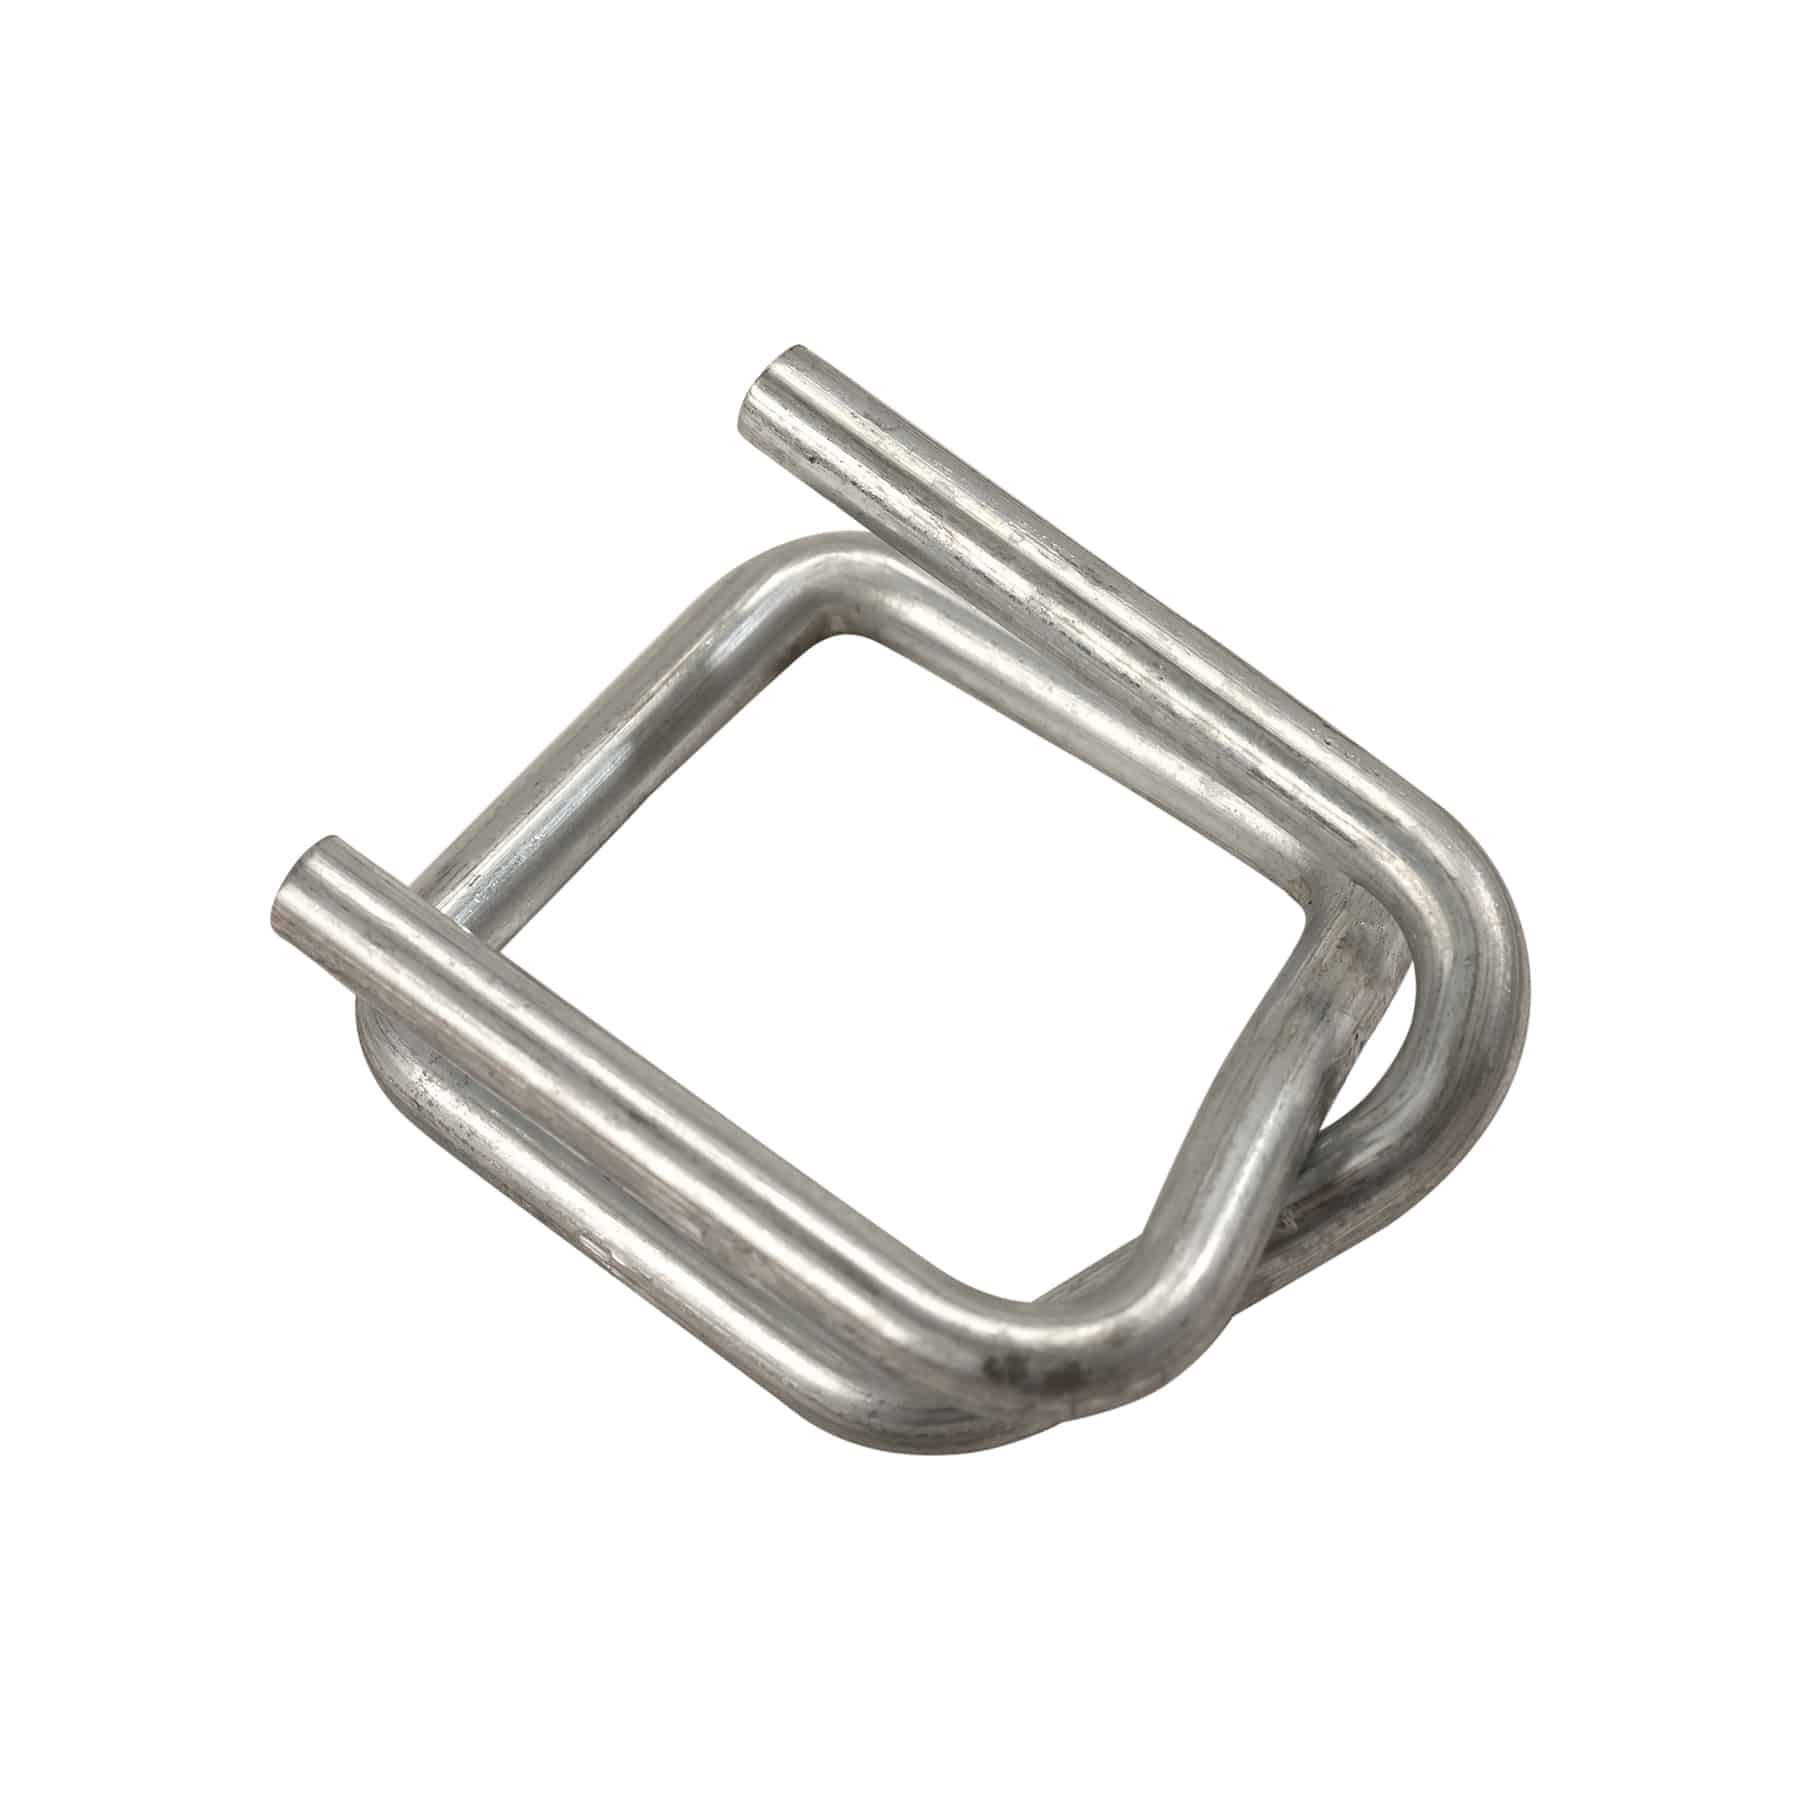 Galvanised Buckles for Corded Strapping